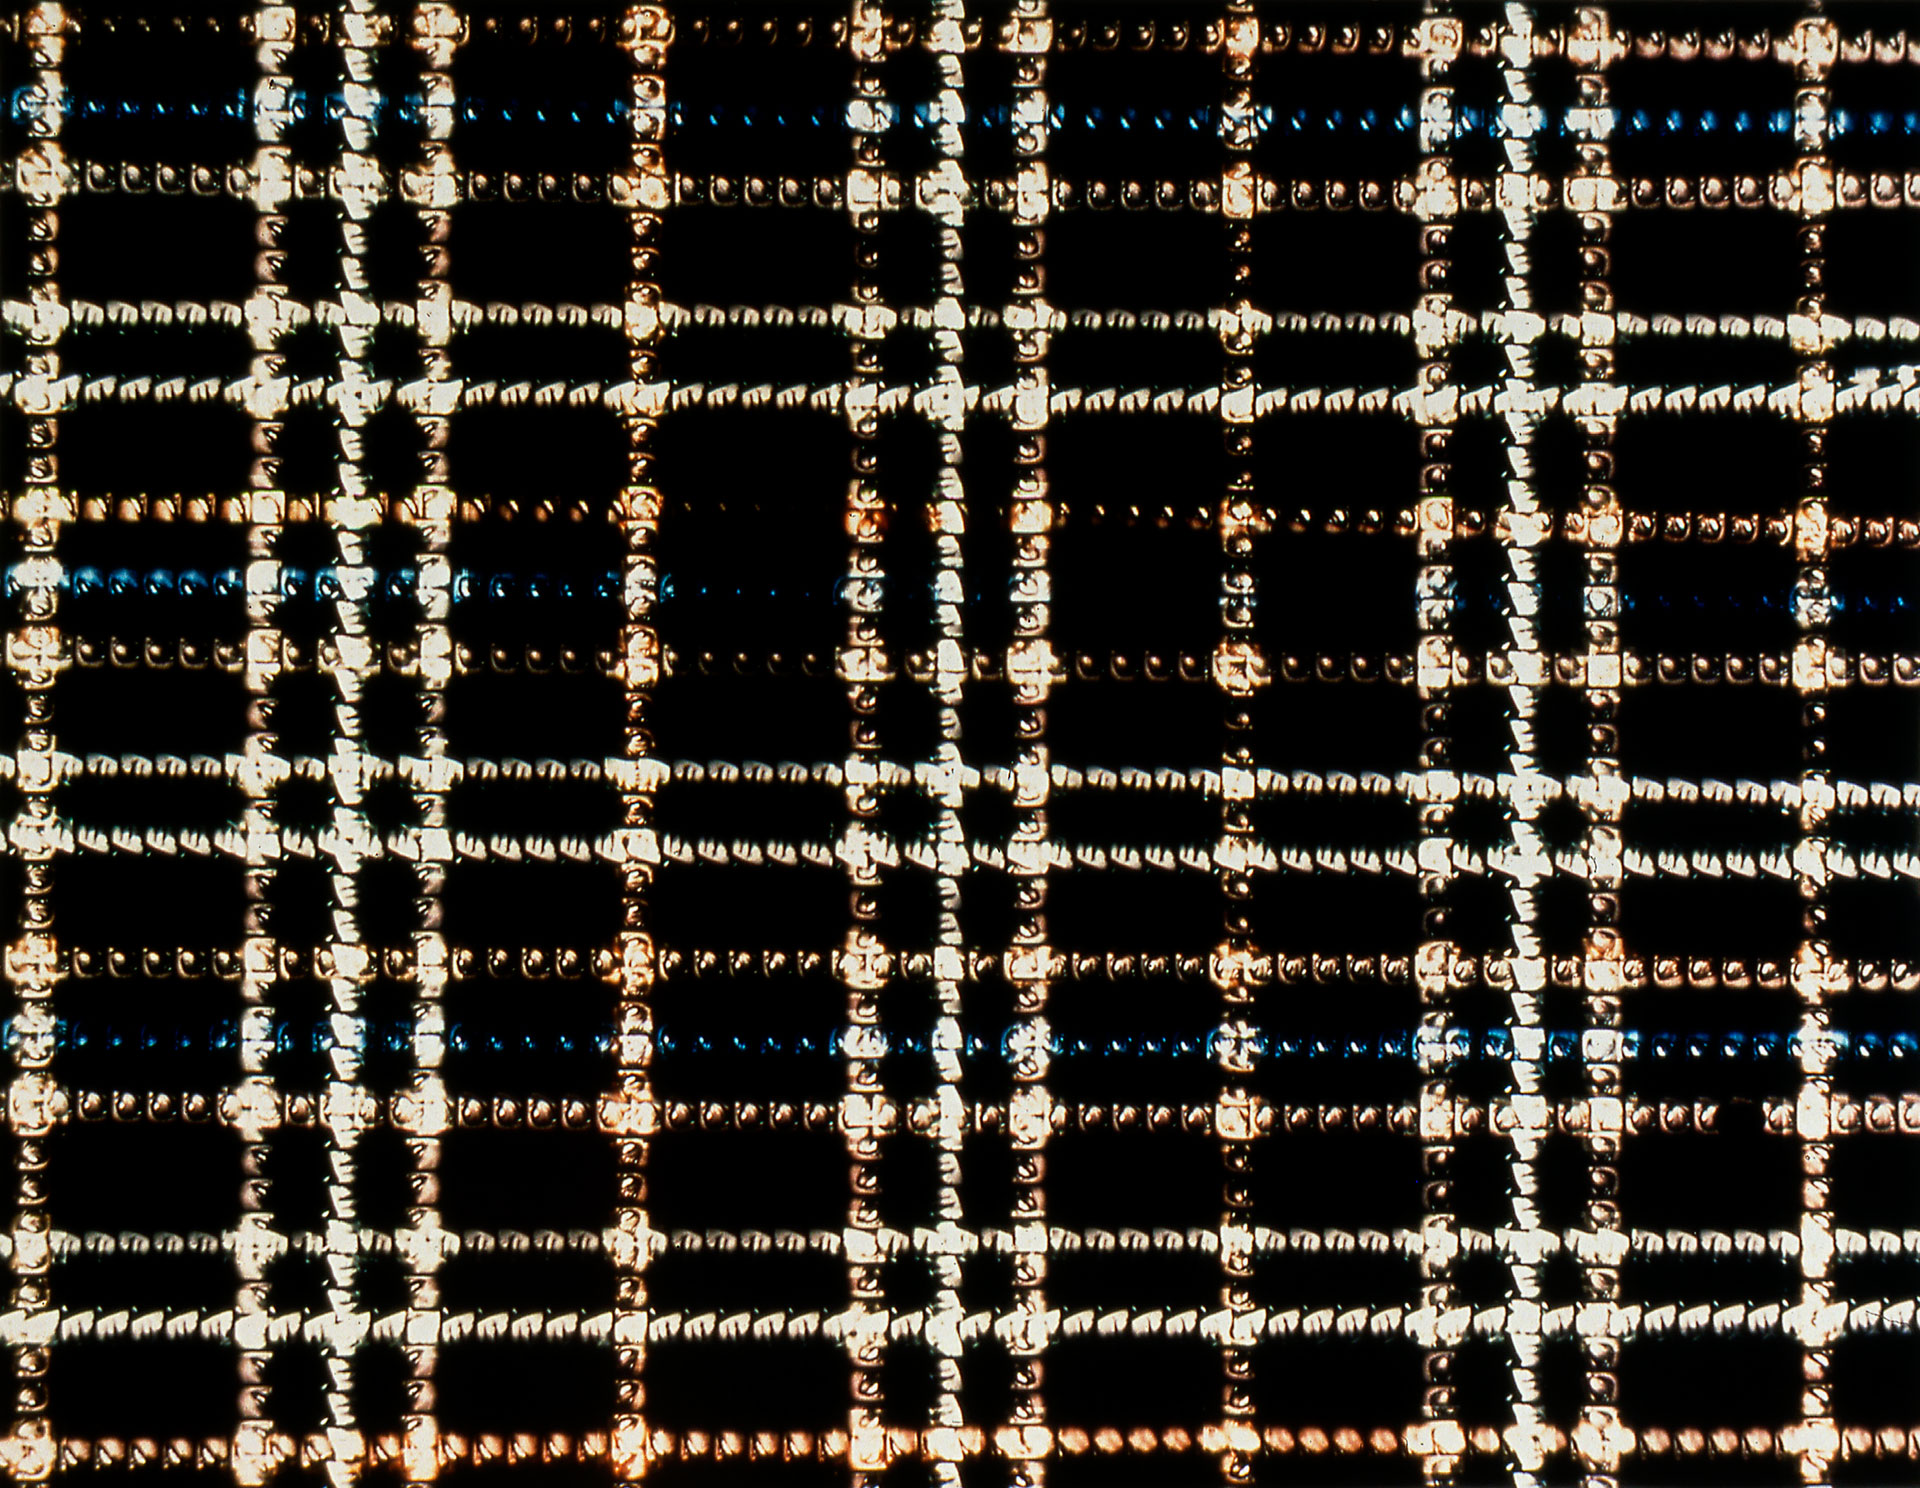 Plaid (speaking, in tongues)